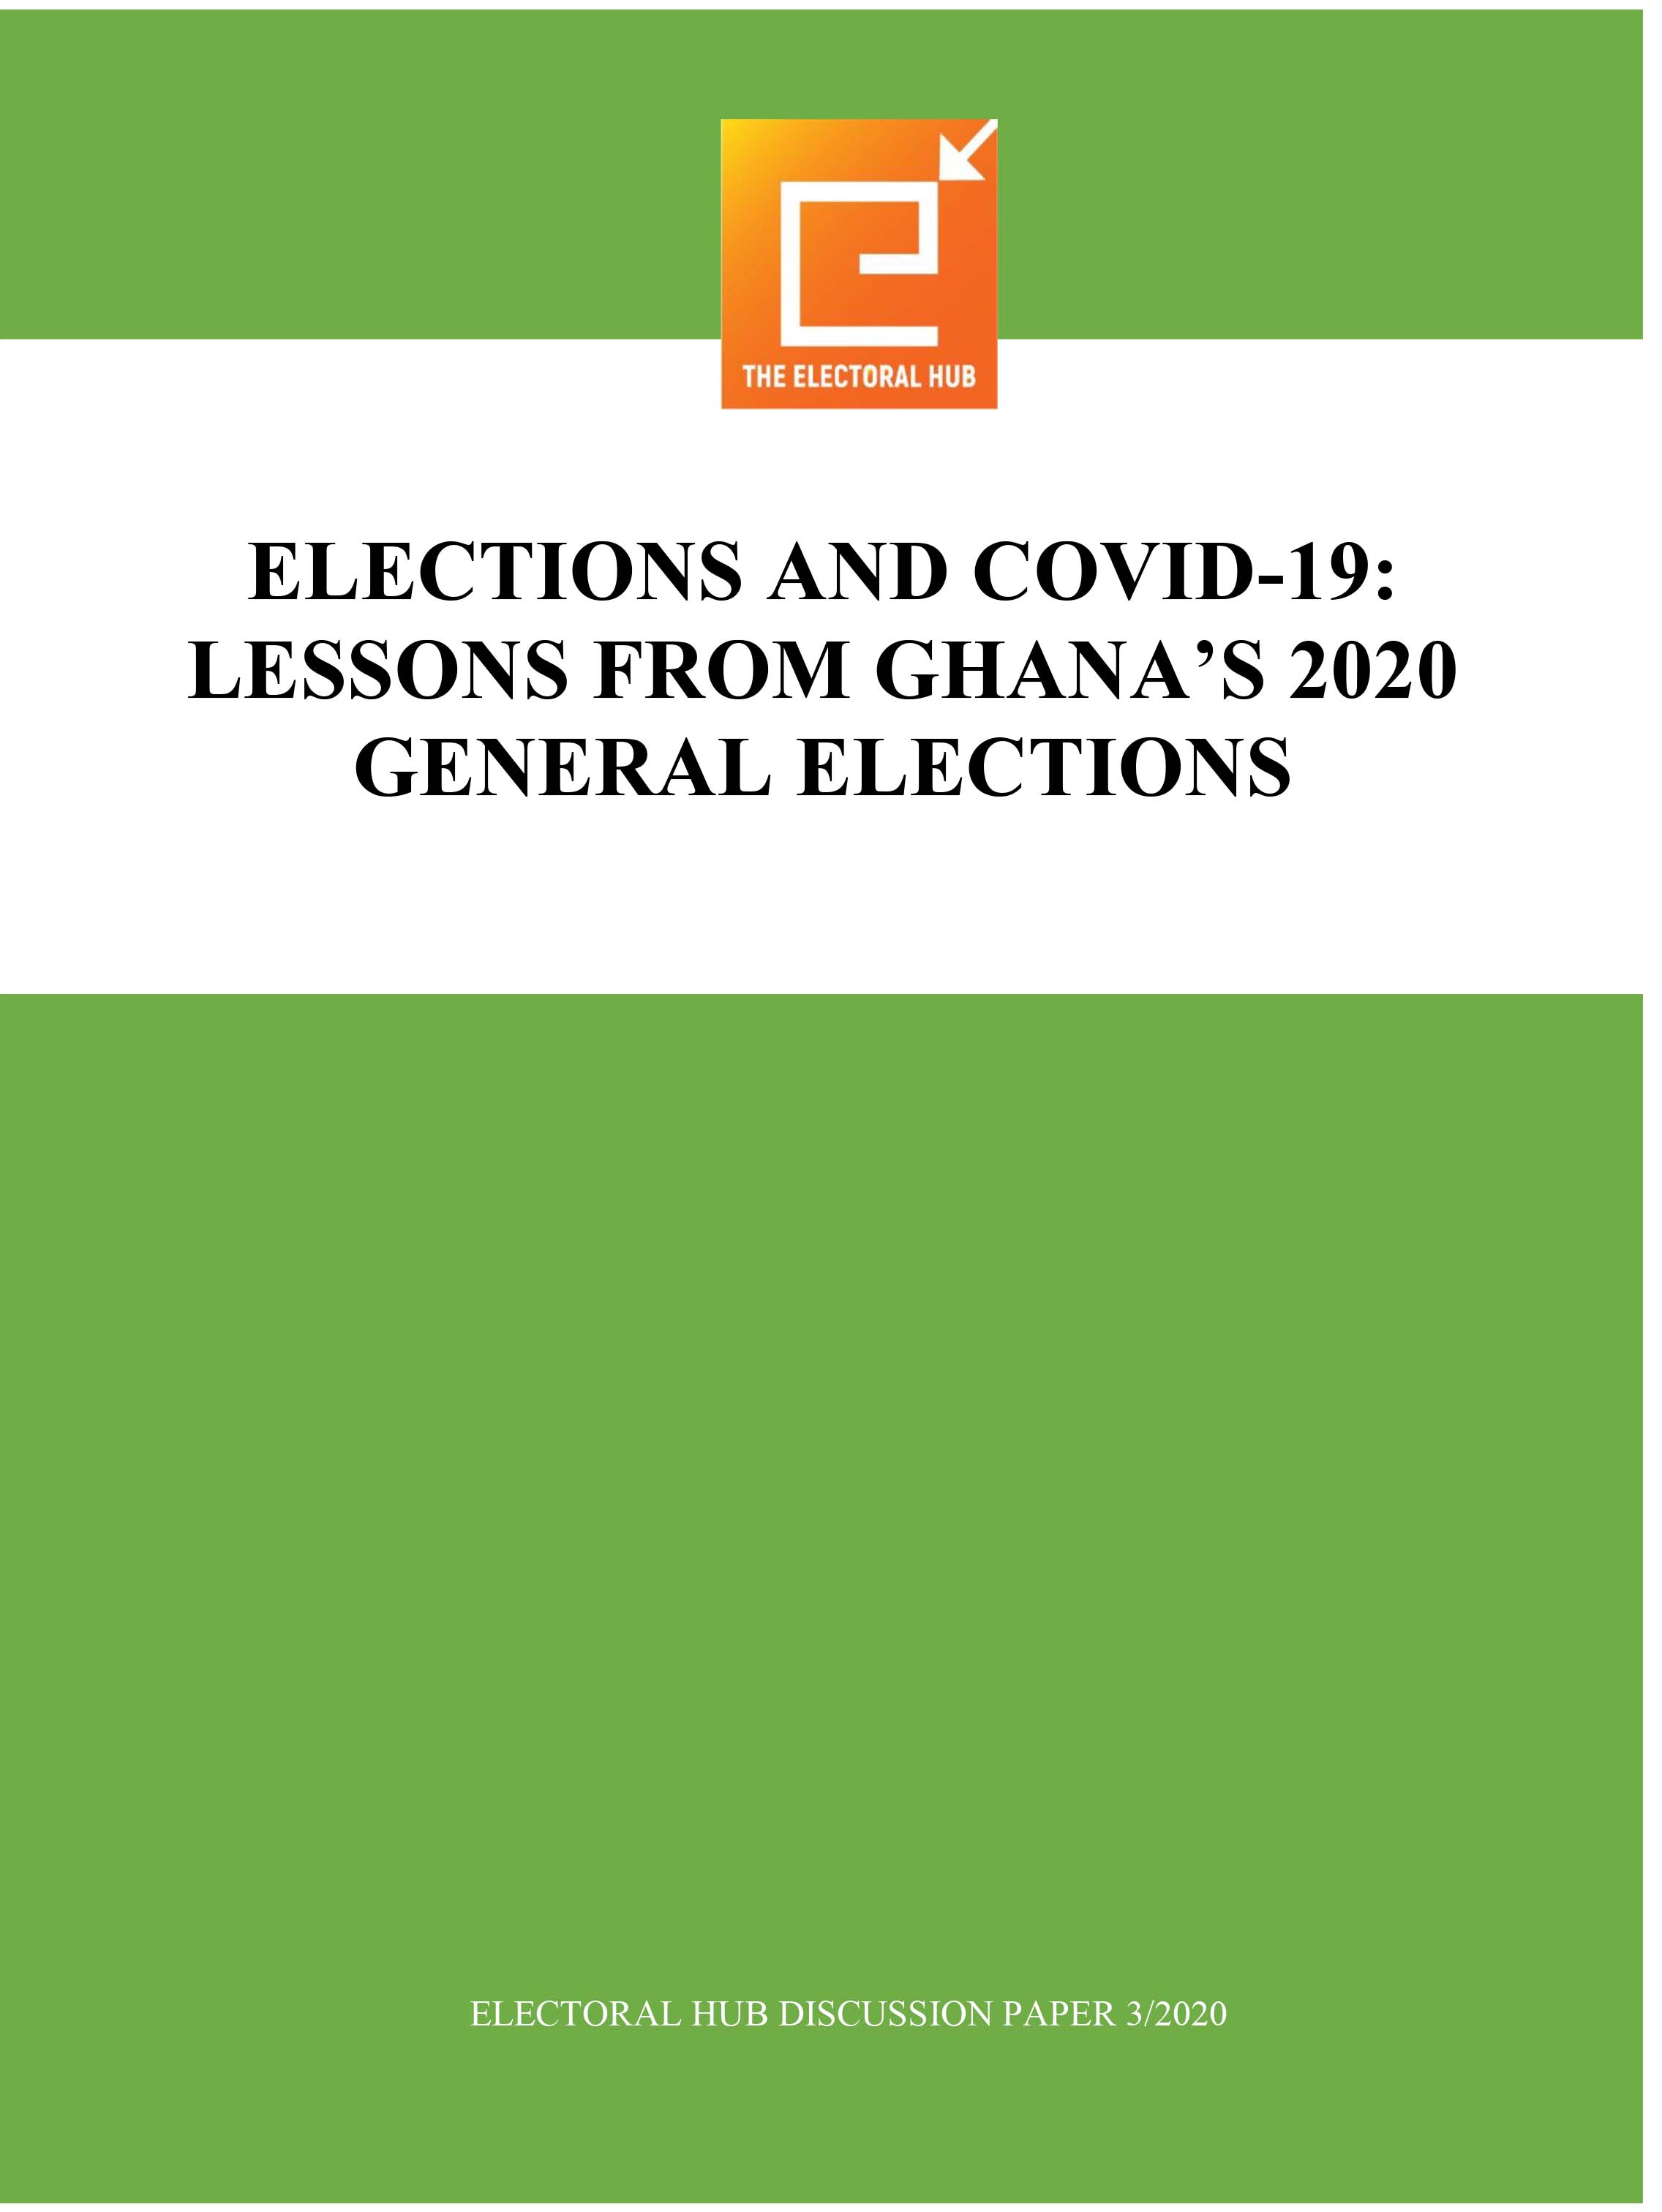 Elections and Covid-19: Lessons from Ghana’s 2020 General Elections